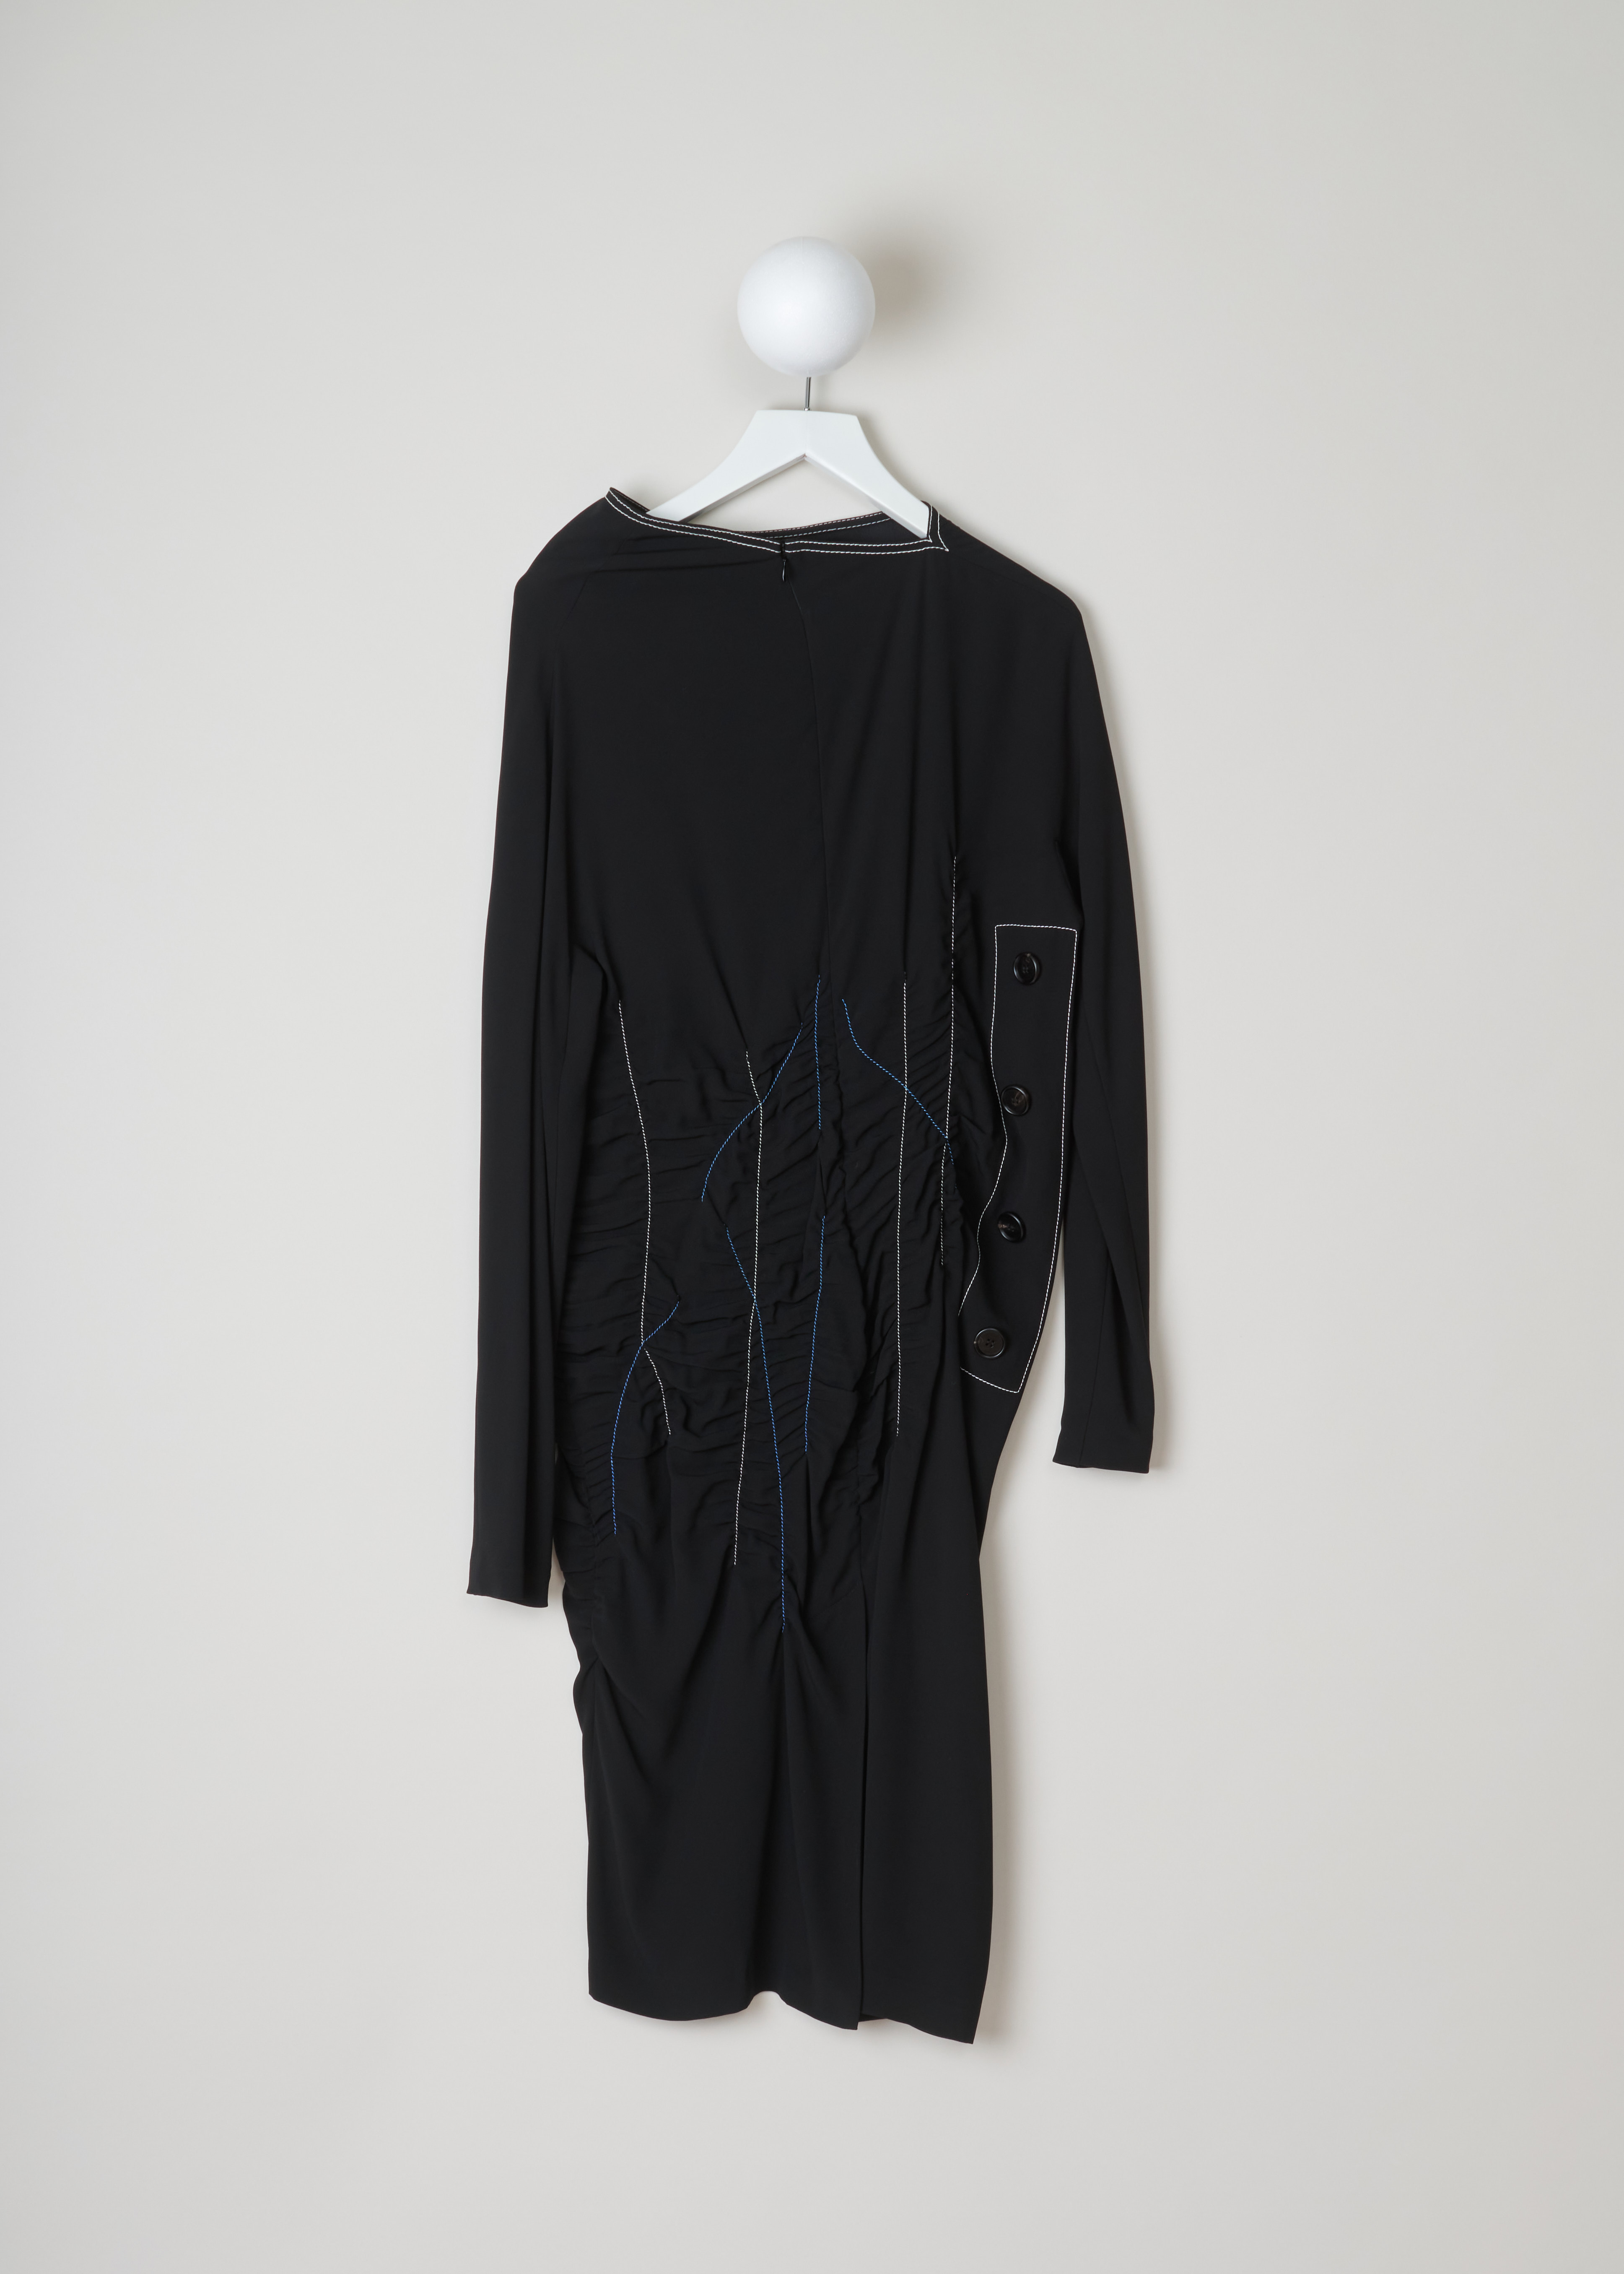 Marni Elasticated black dress ABMAZ51M00_TV285_00N99 black back. Long sleeves black dress with contrasting blue and white elastic stitching to create gathers in the mid-section of the dress.